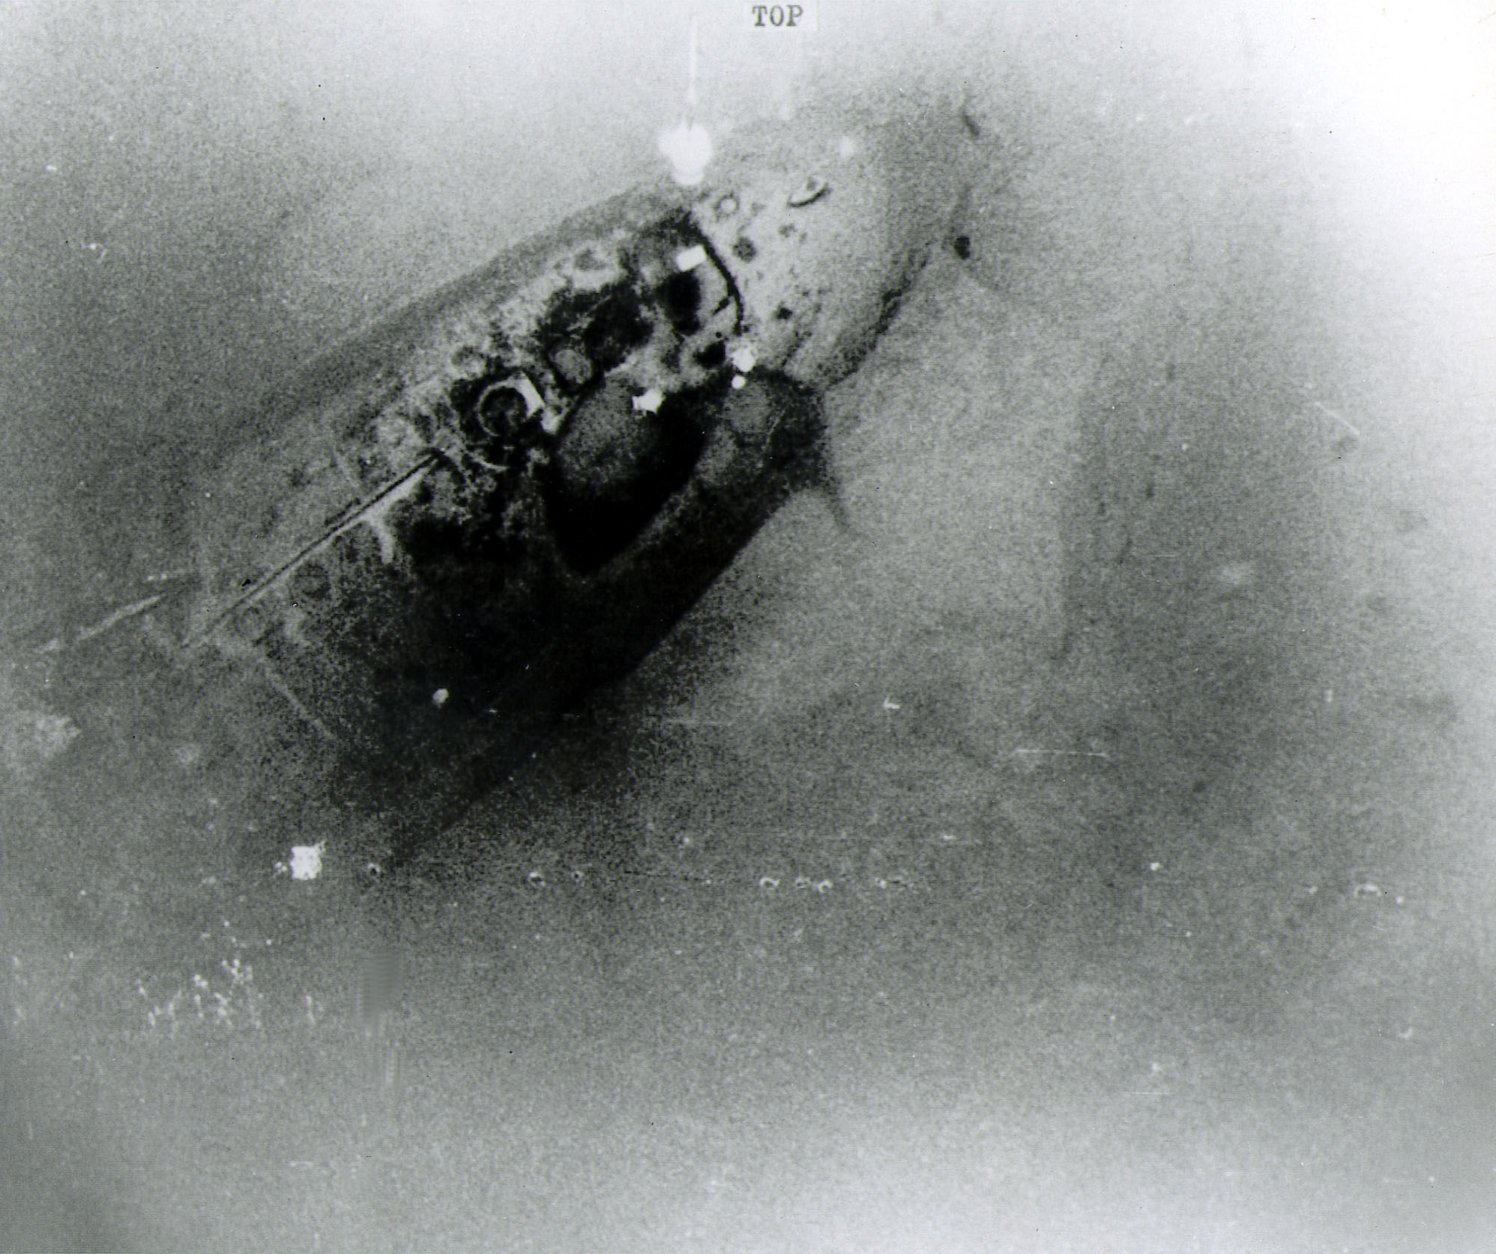 First photo of sunken "USS Scorpion" (SSN589) - The Department of Defense released this picture in Washington, in January 1969, and described it as a view of the top of the bow section, from the  vicinity of the sail (which has been torn off), at left,- to the  tip of the bow, at top cente, the torpedo room hatch is visible about half-way along the length of this hull section, with a lifeline track running after from it, of the submarin Scorpion resting on the botton of the Atlantic Ocean floor 10,000 feet deep, 400 miles southwest of the Azores. The department said the hull of the missing submarin was located and photographed in more than 10,000 feet of water last Oct. 29, 1968, by the researche ship Mizar. The Scorpion was reported missing on May 22, 1968. (AP-Photo/U.S. Navy-HO)   18. Mai 2000